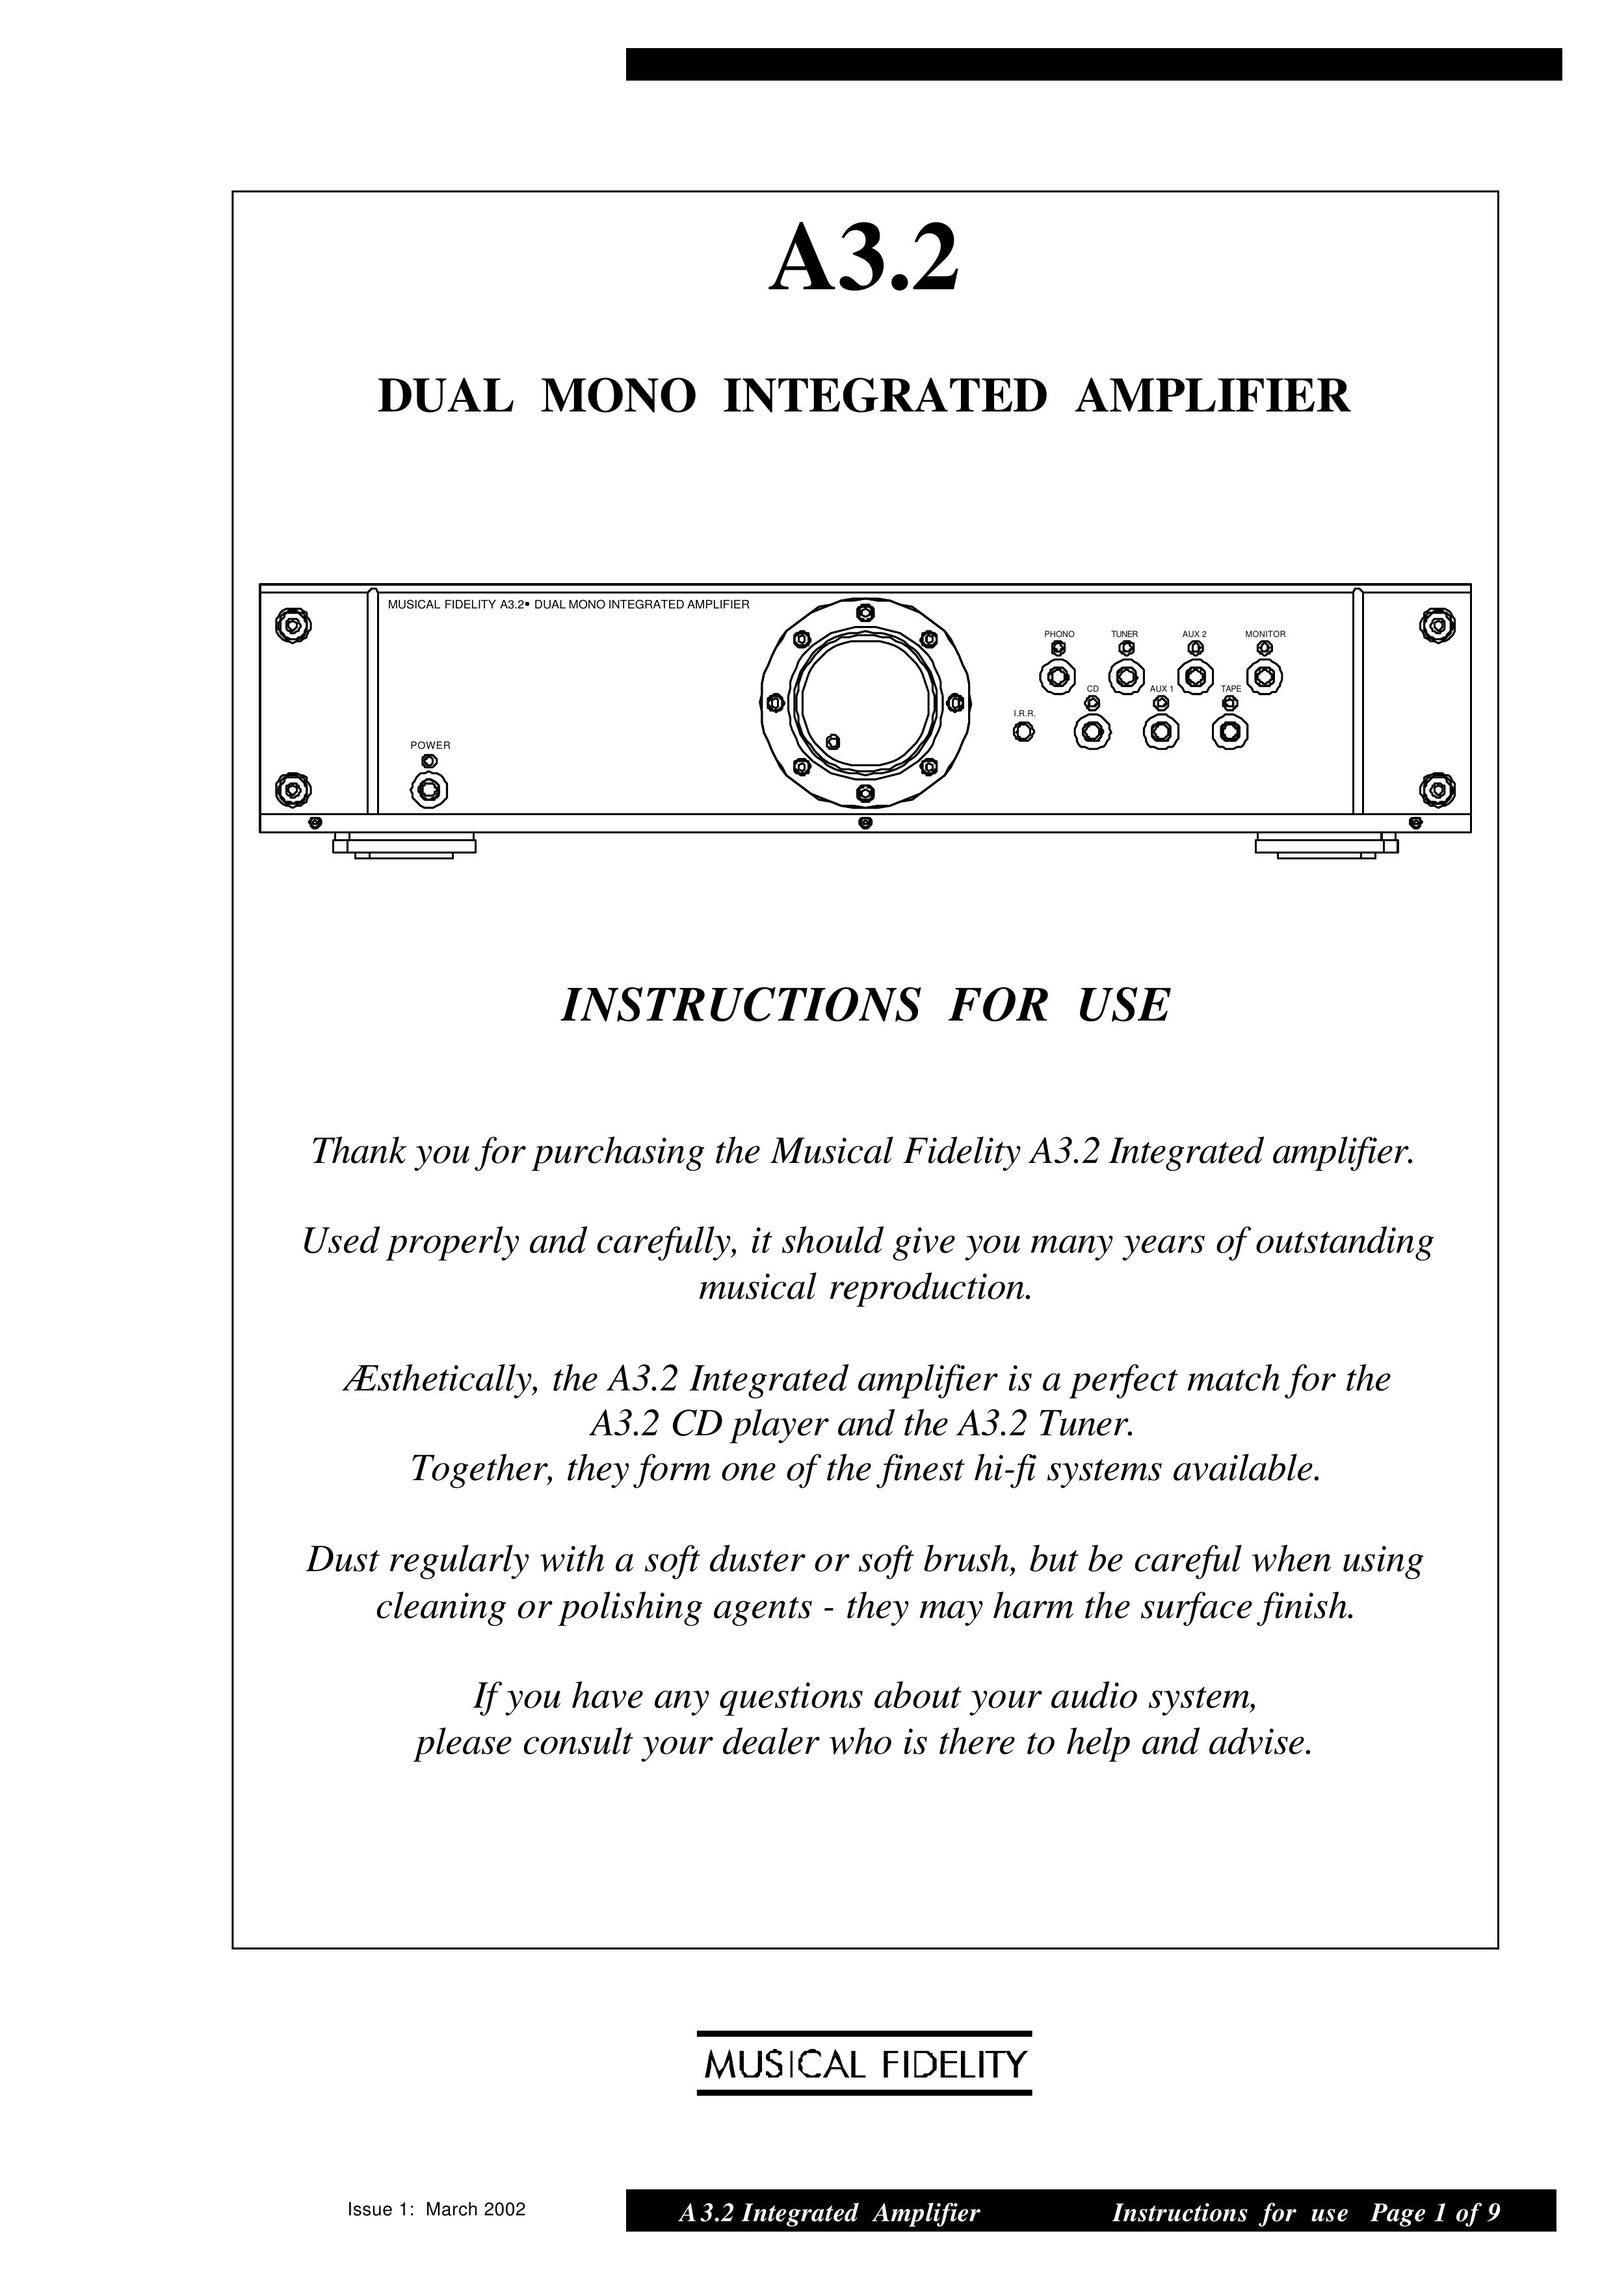 Musical Fidelity A3.2 Stereo Amplifier User Manual